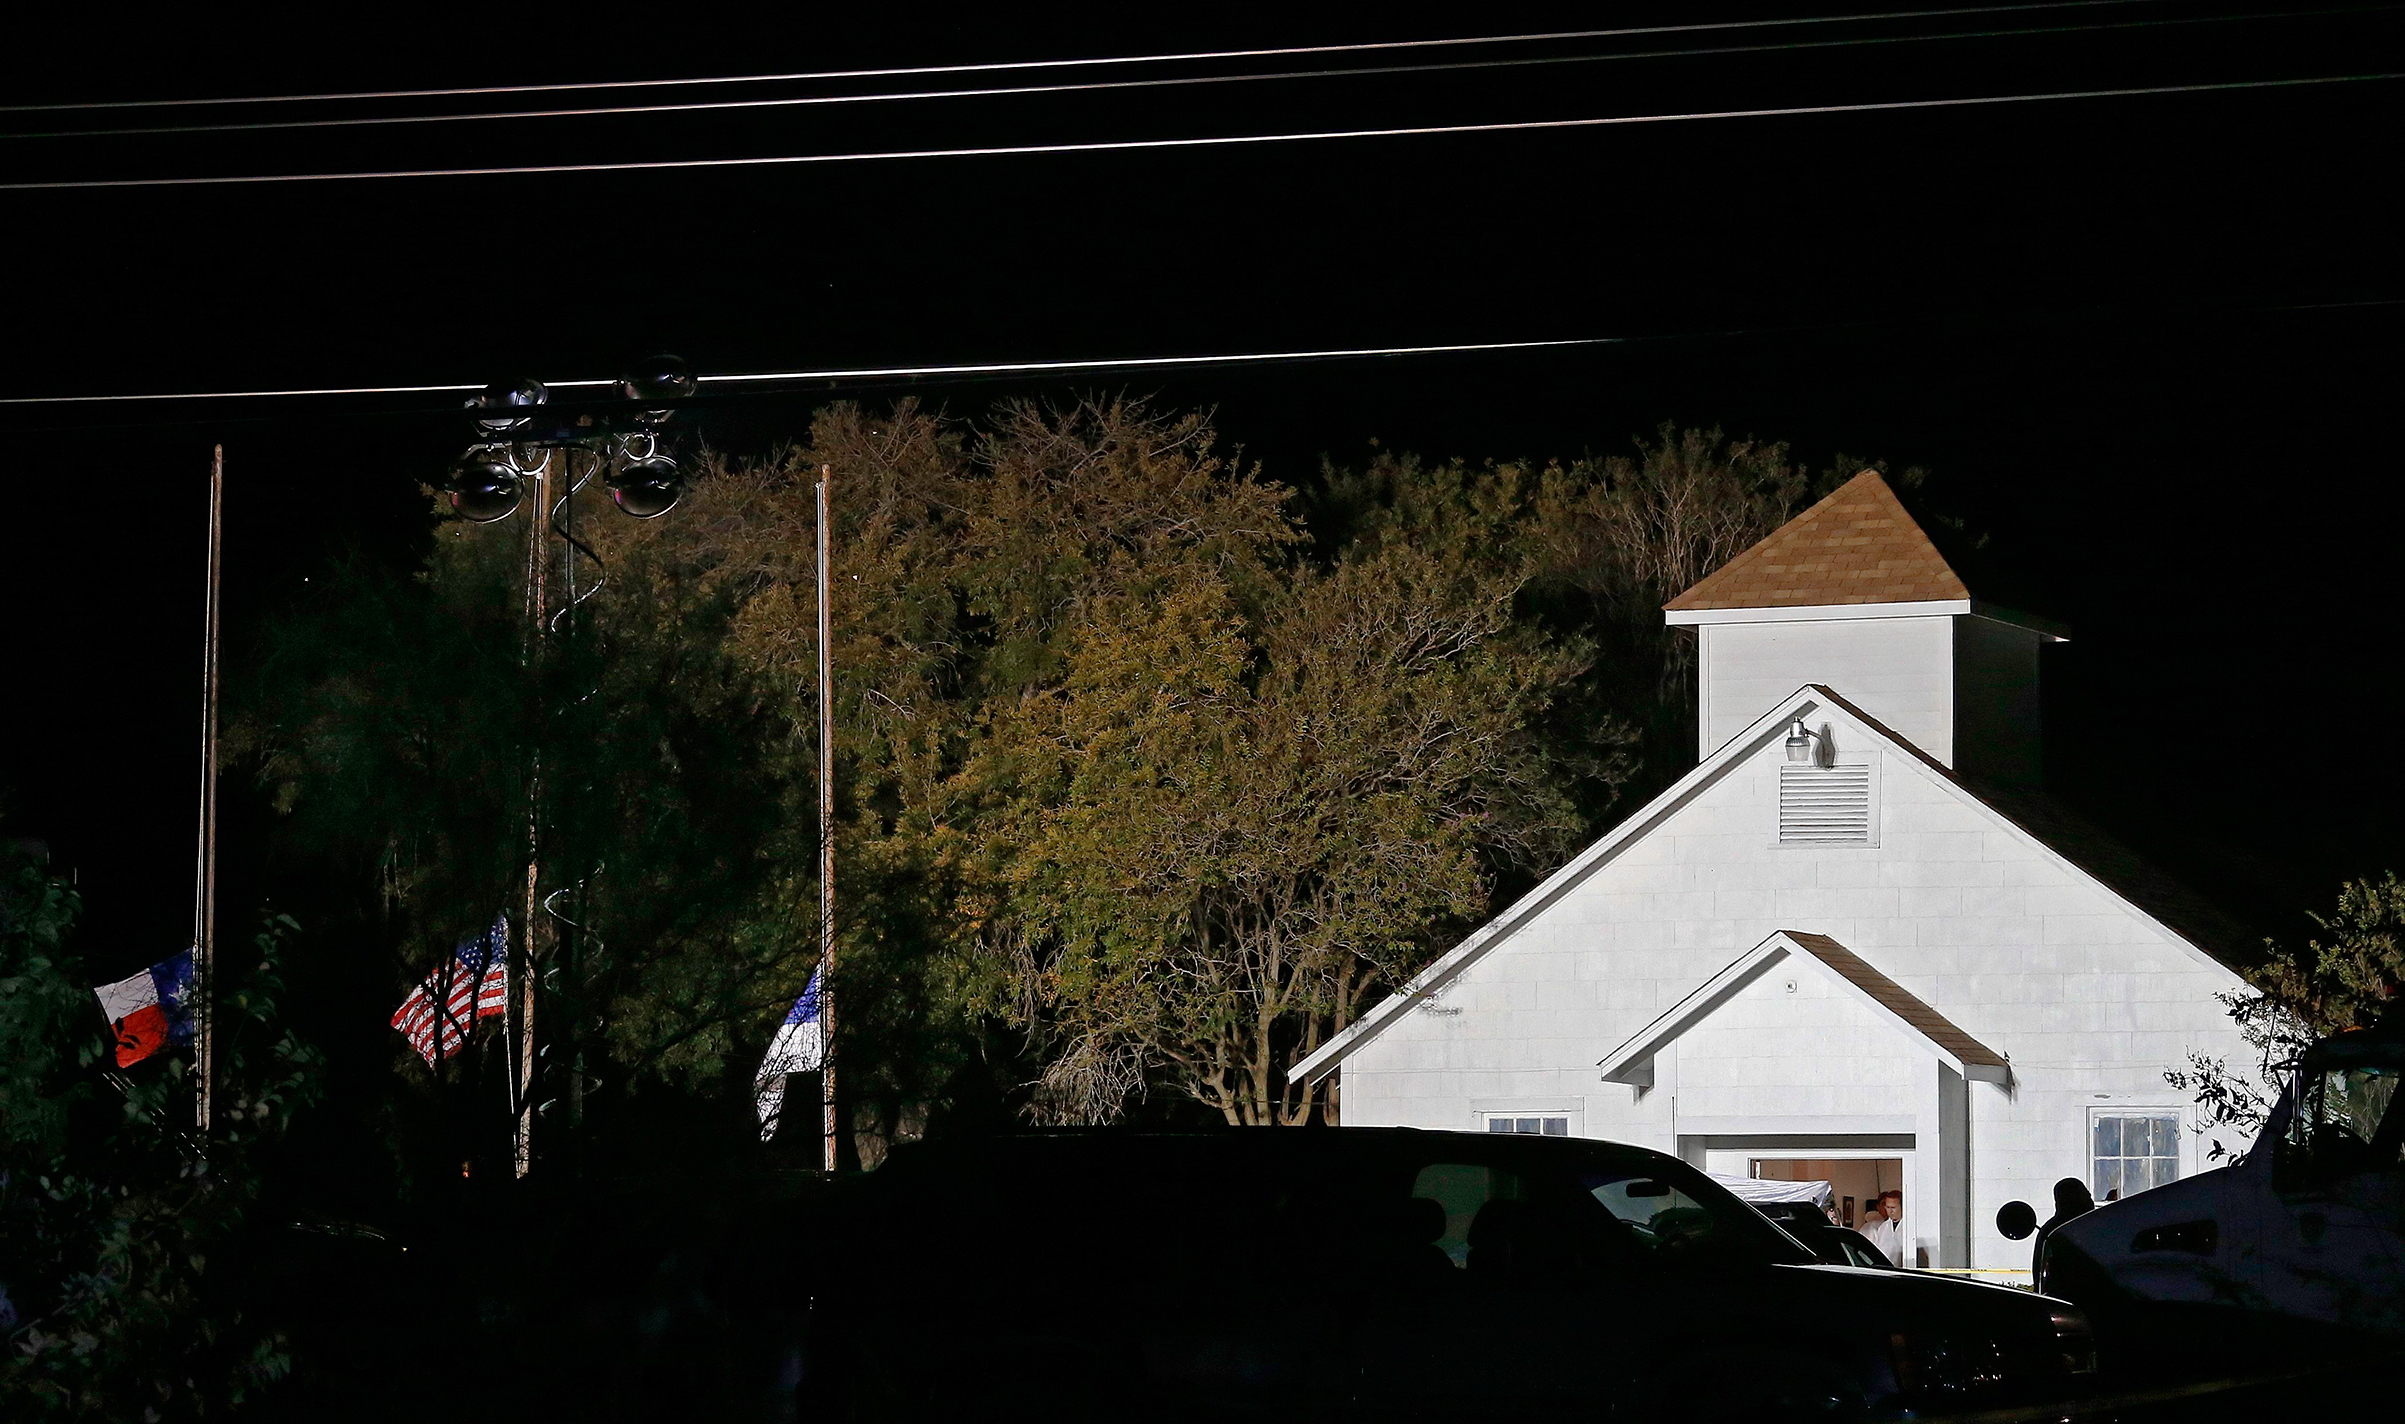 The First Baptist Church in Sutherland Springs is illuminated by raised lamps as investigators work, hours after the shooting on Nov. 5 (Larry W. Smith—EPA-EFE/REX/Shutterstock)